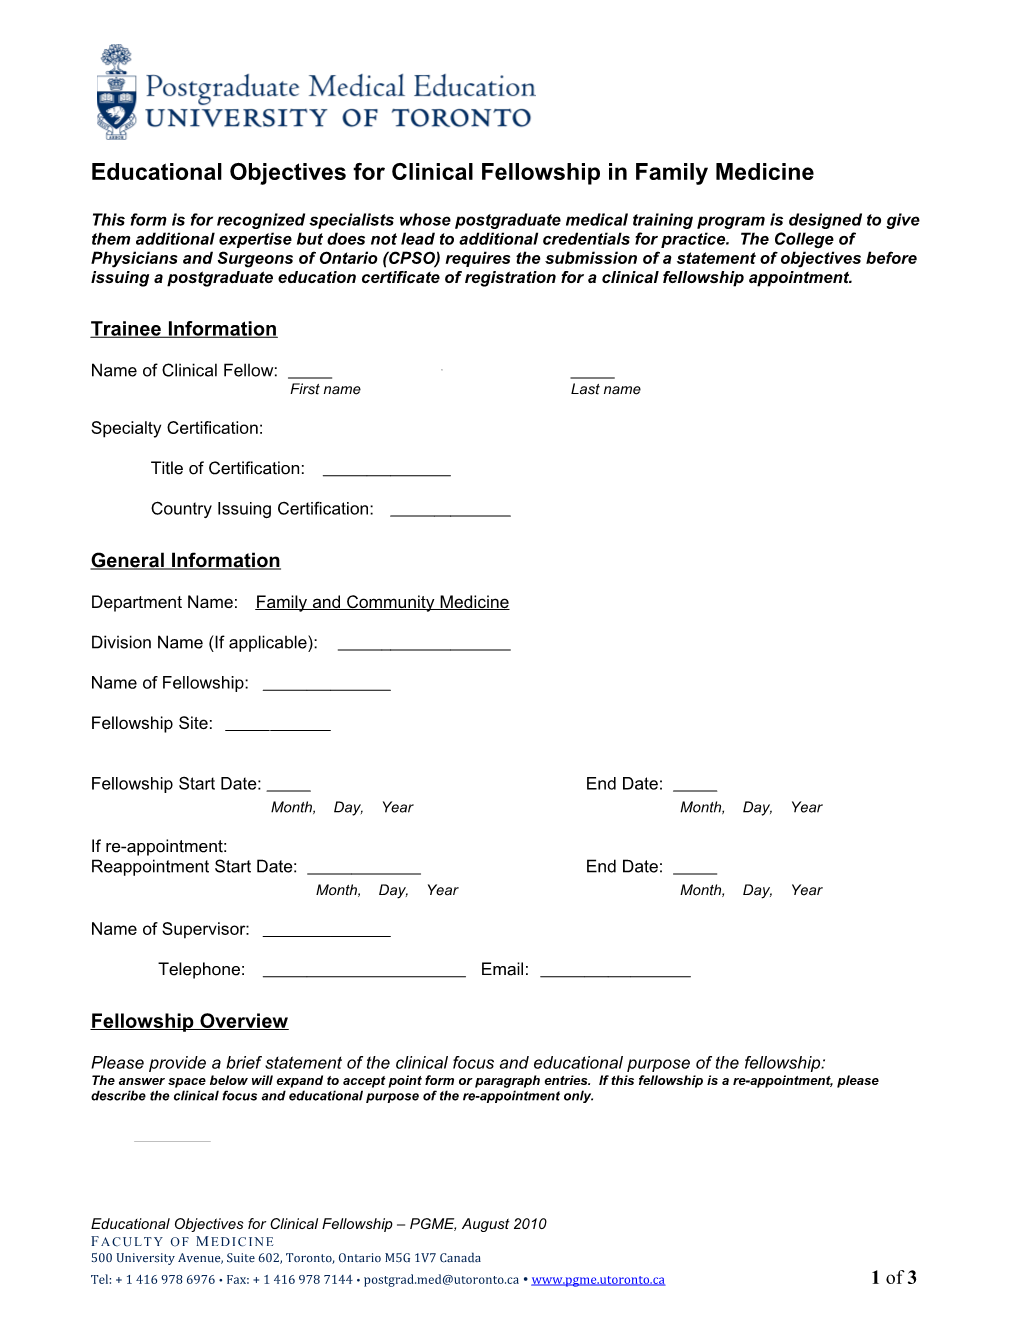 Educational Objectives for Clinical Fellowship in Family Medicine